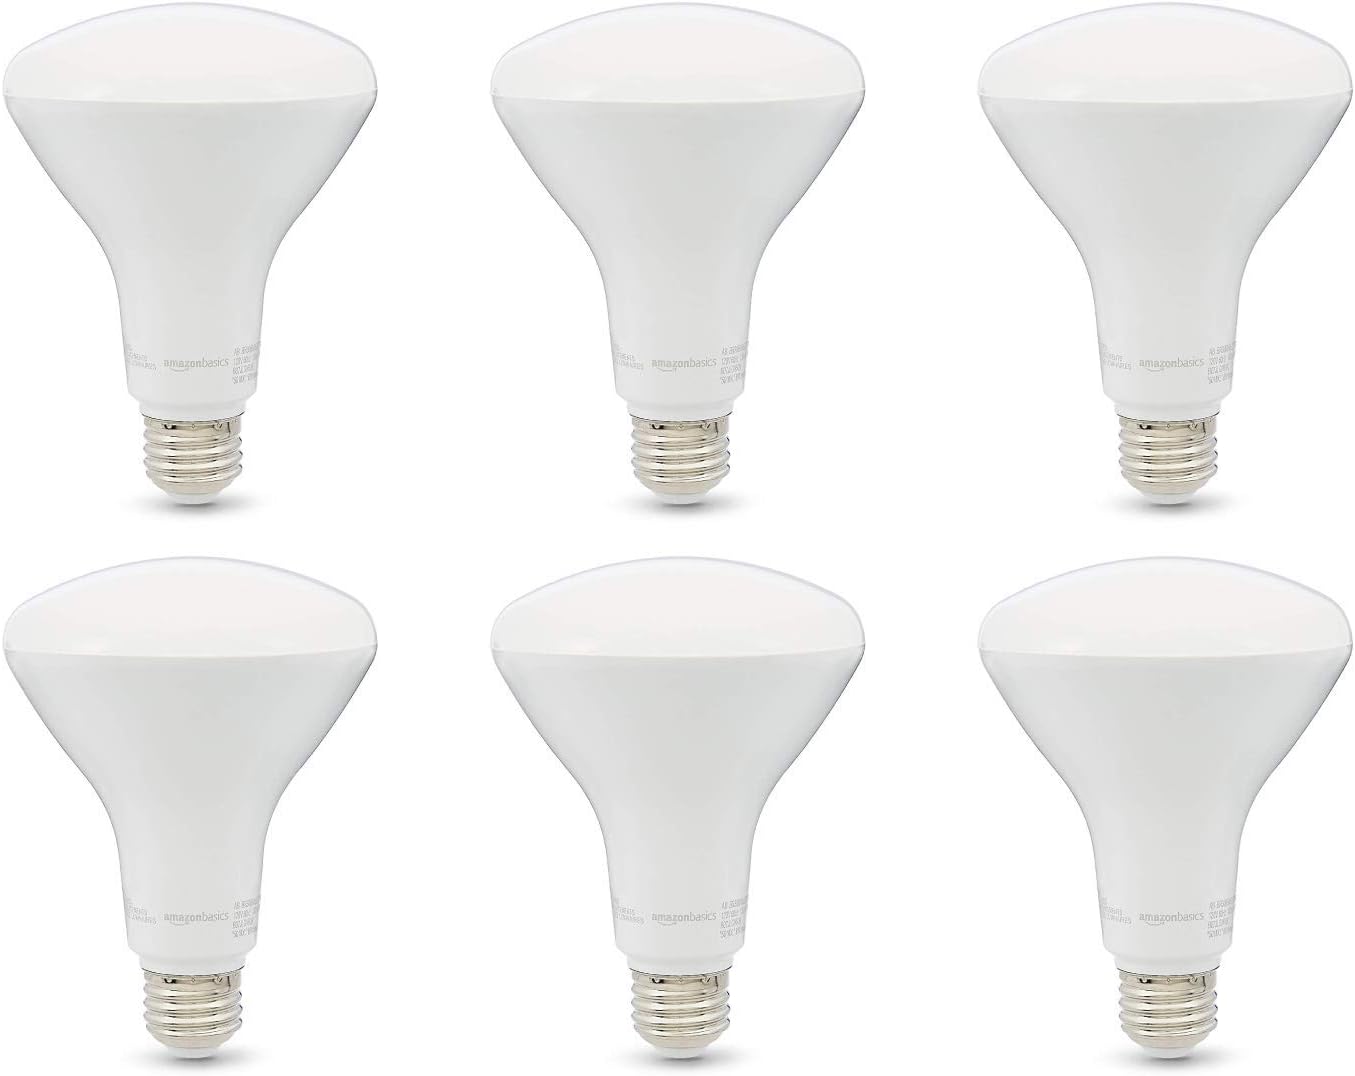 6-Pack Amazon Basics Dimmable BR30 LED Light Bulbs 11W (Daylight White) $9.50 + Free Shipping